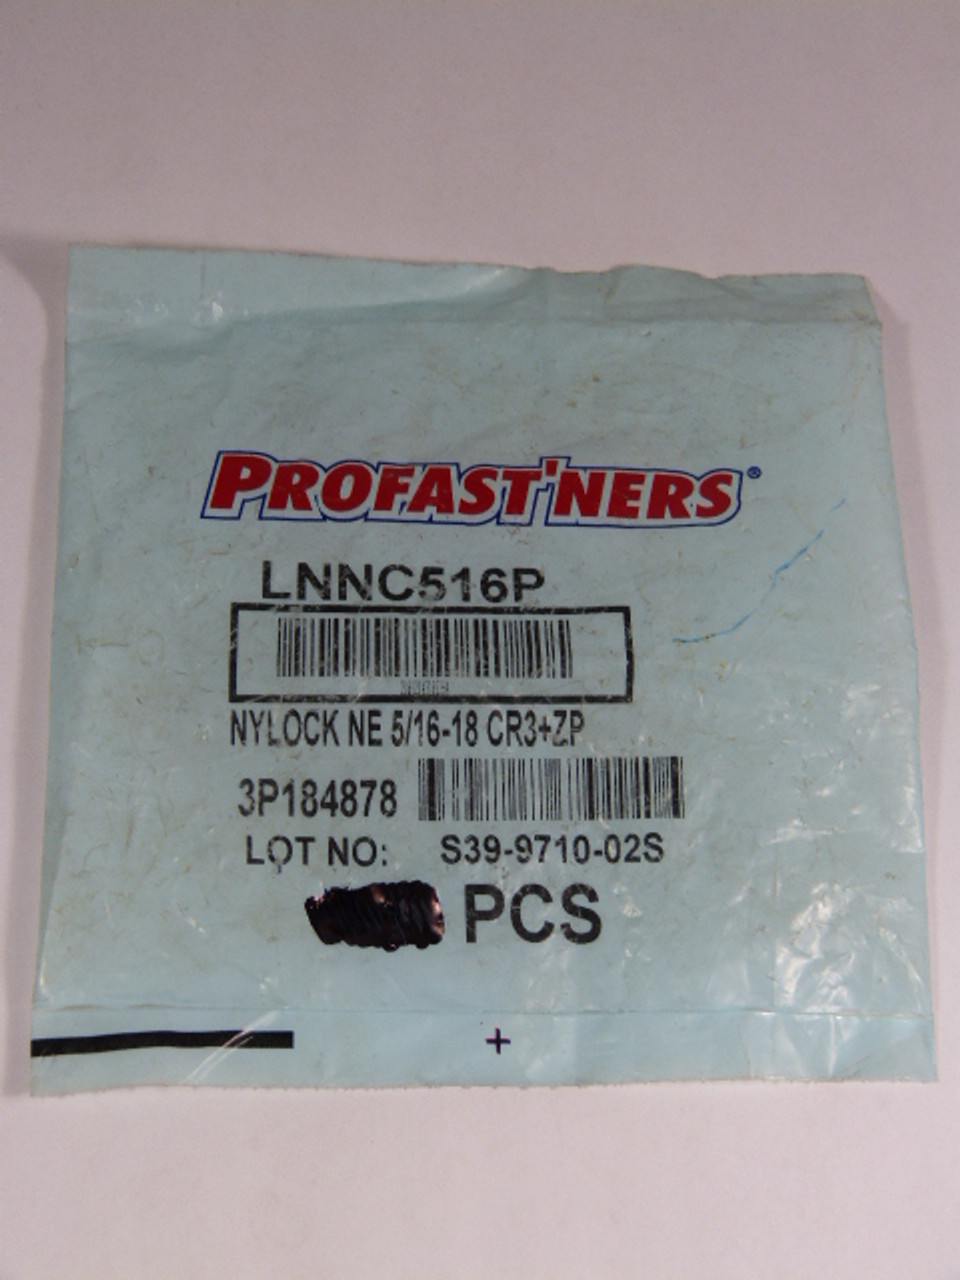 Profast'ners LNNC516P Nylock Nut 5/16-18 90-Pack ! NOP !